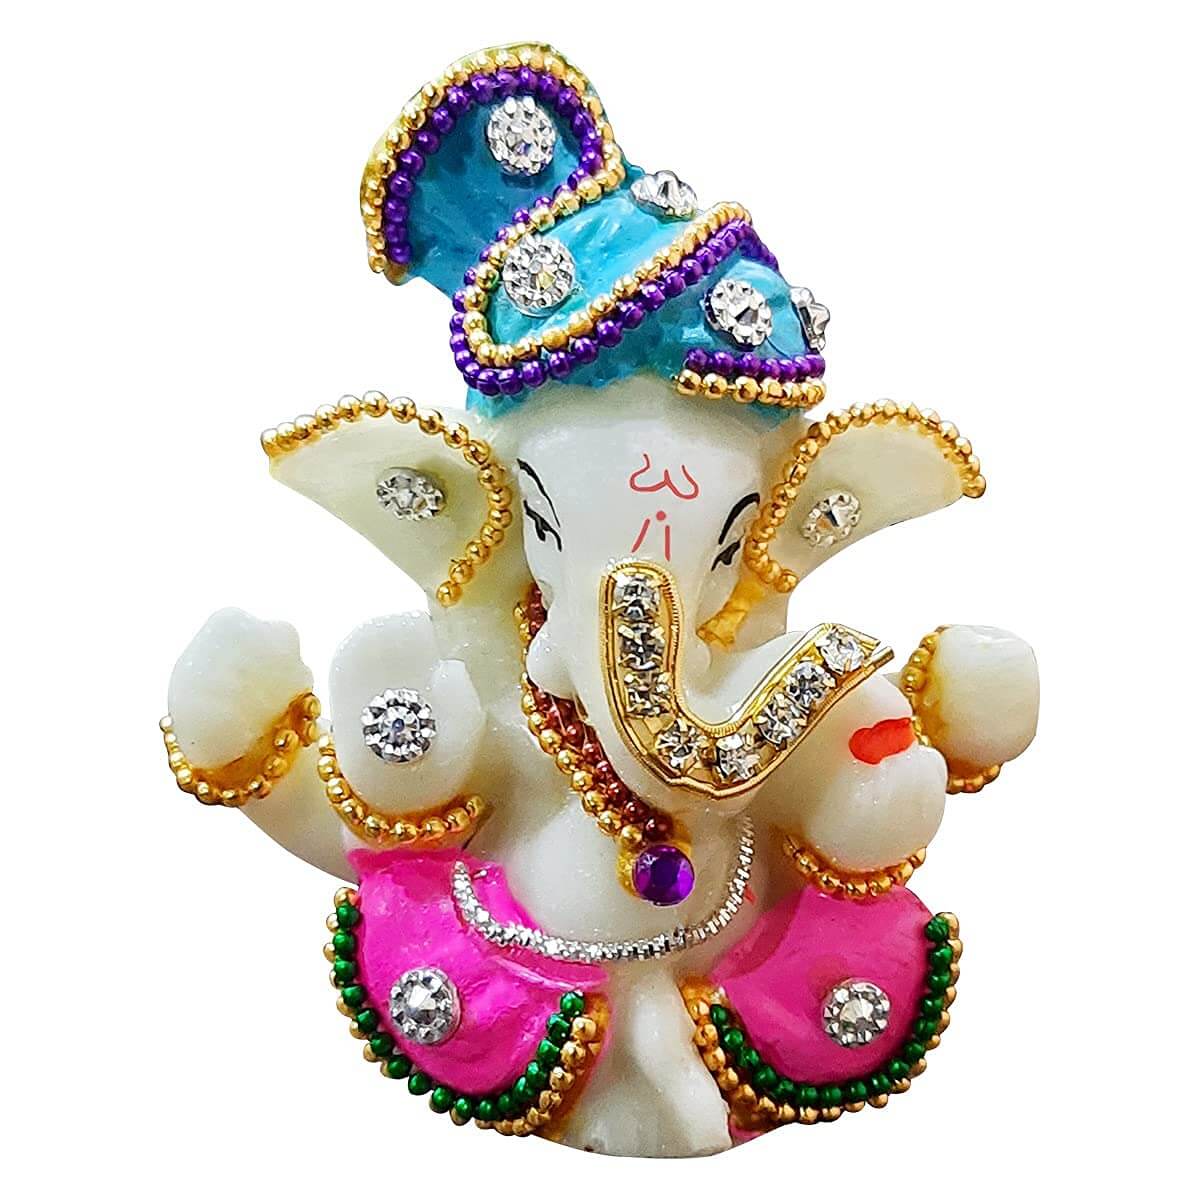 White Stone God Ganesha Statue for Car Dashboard and Home Decor, 3x2x3 Inches (Multicolour) Mangal Fashions | Indian Home Decor and Craft